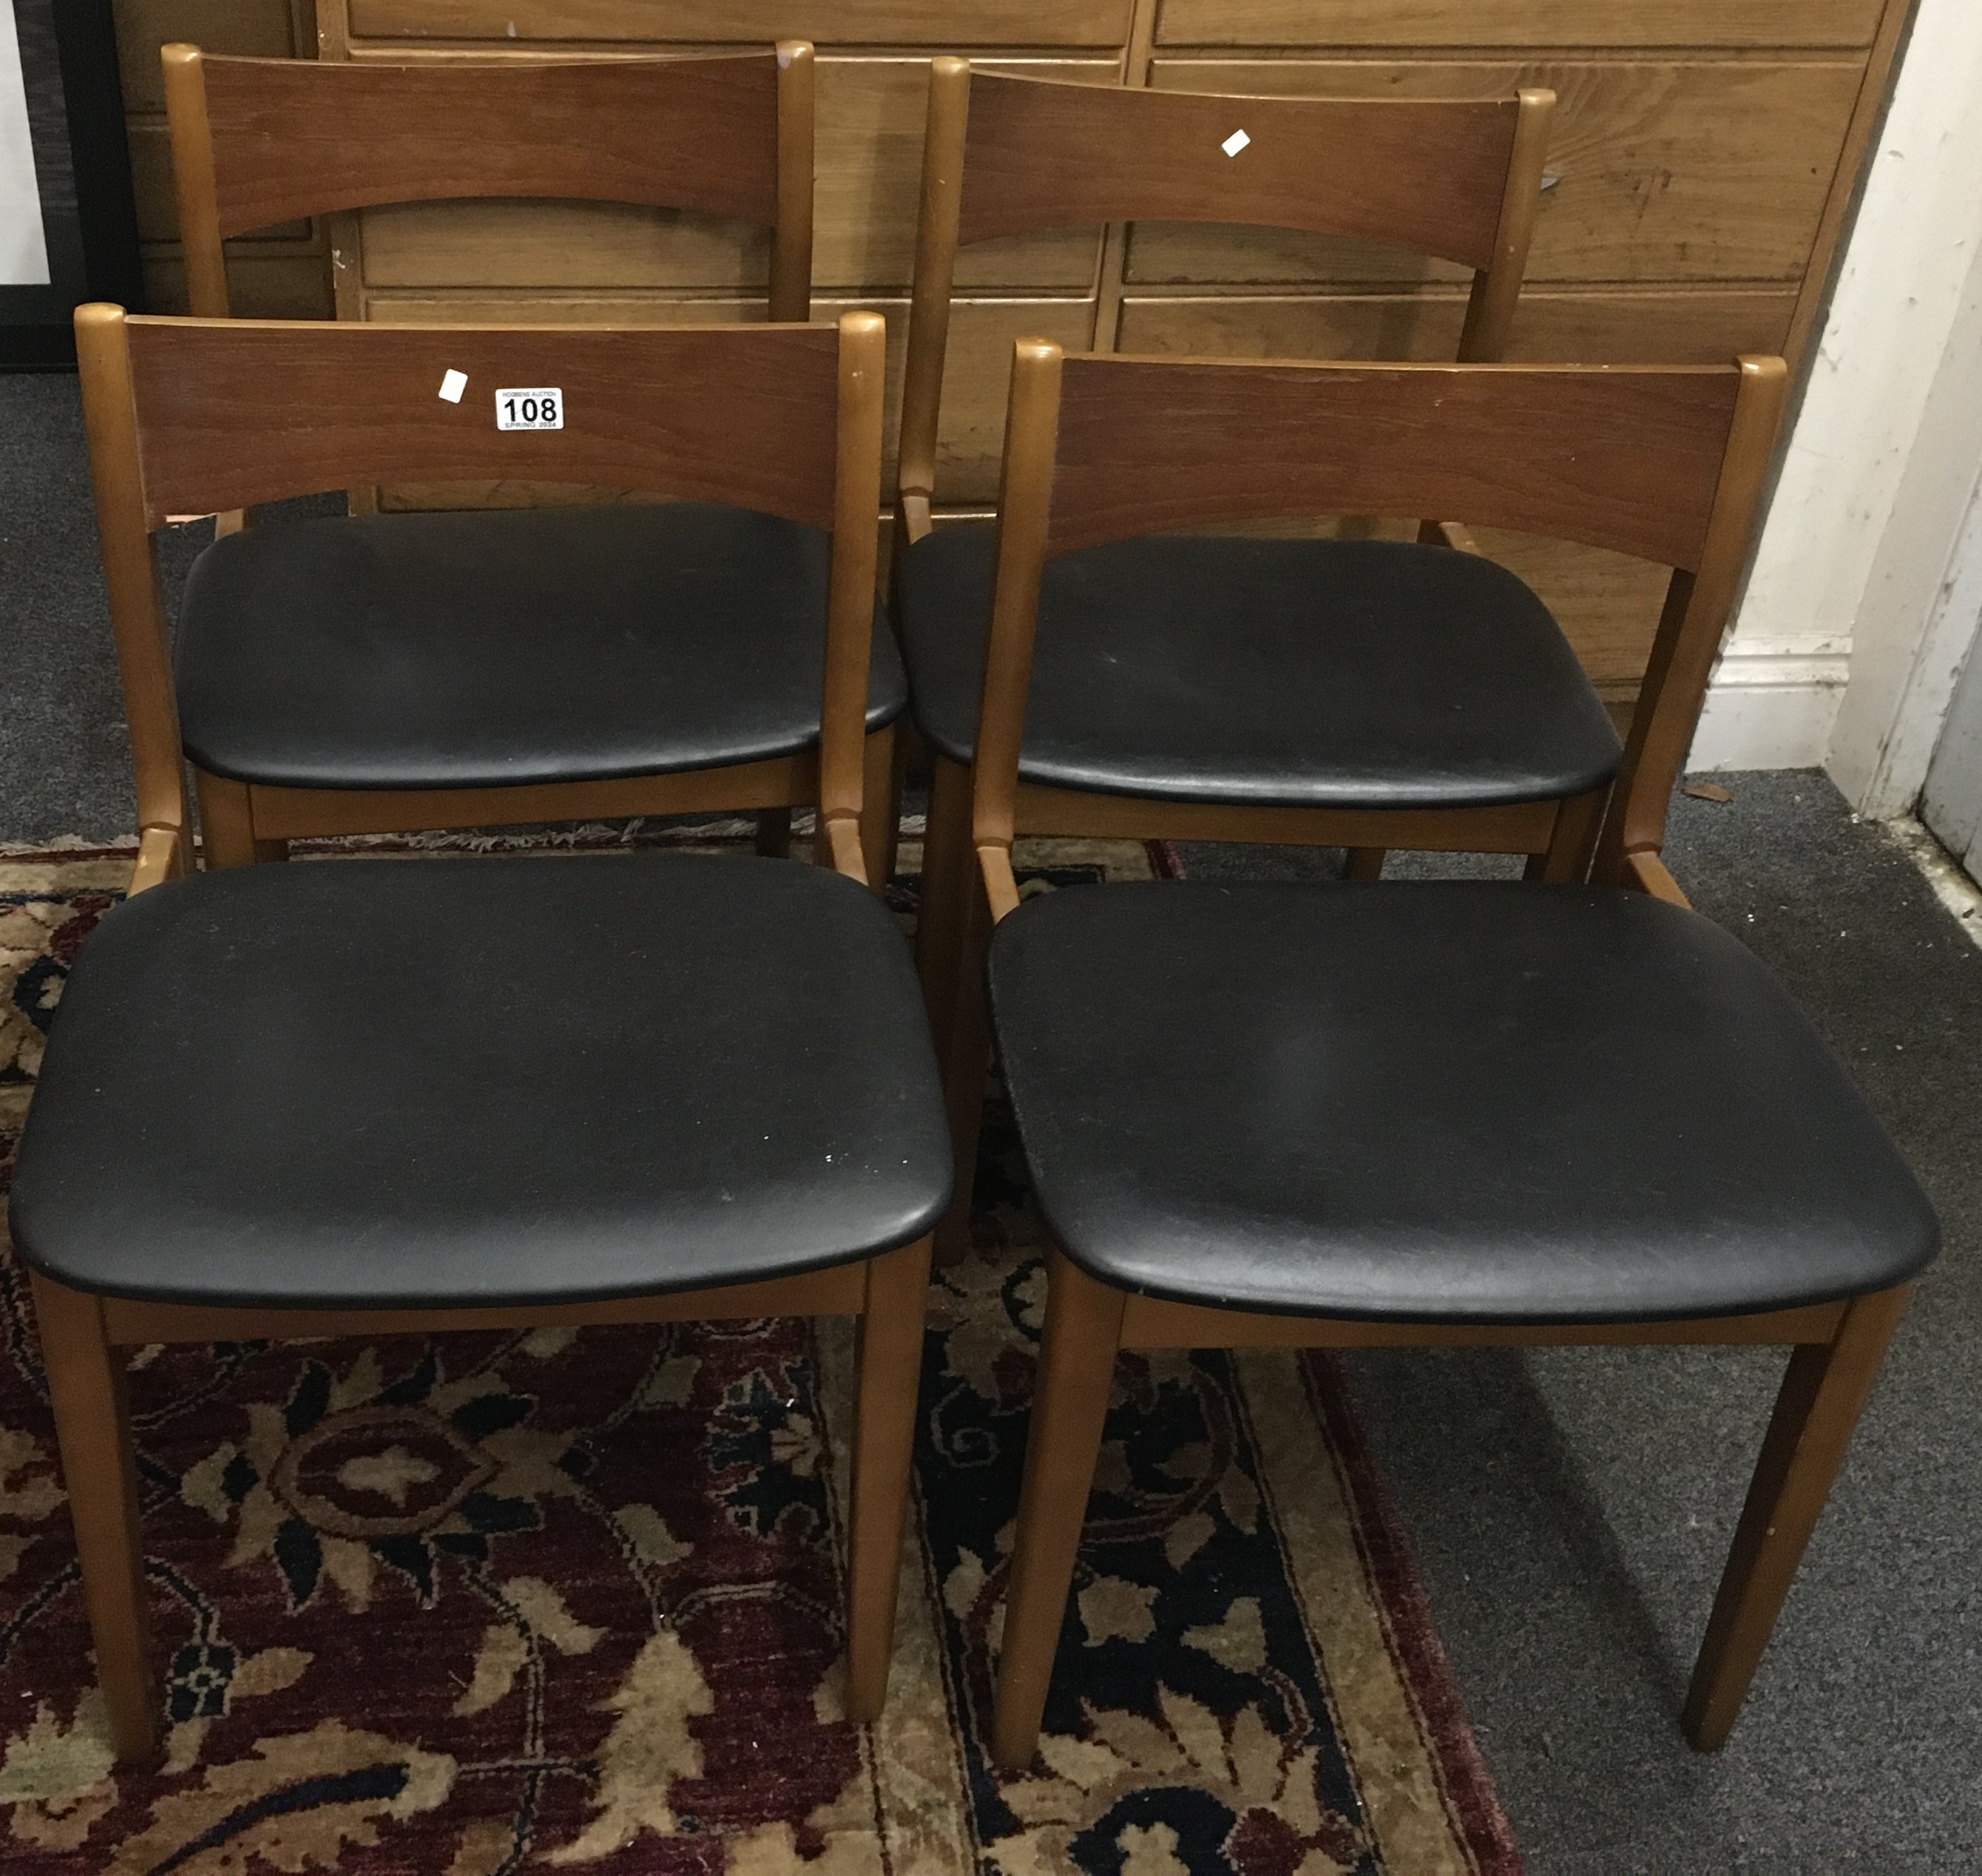 Matching set of 4 mid 20 th century G-Plan teak chairs with black leatherette upholstery